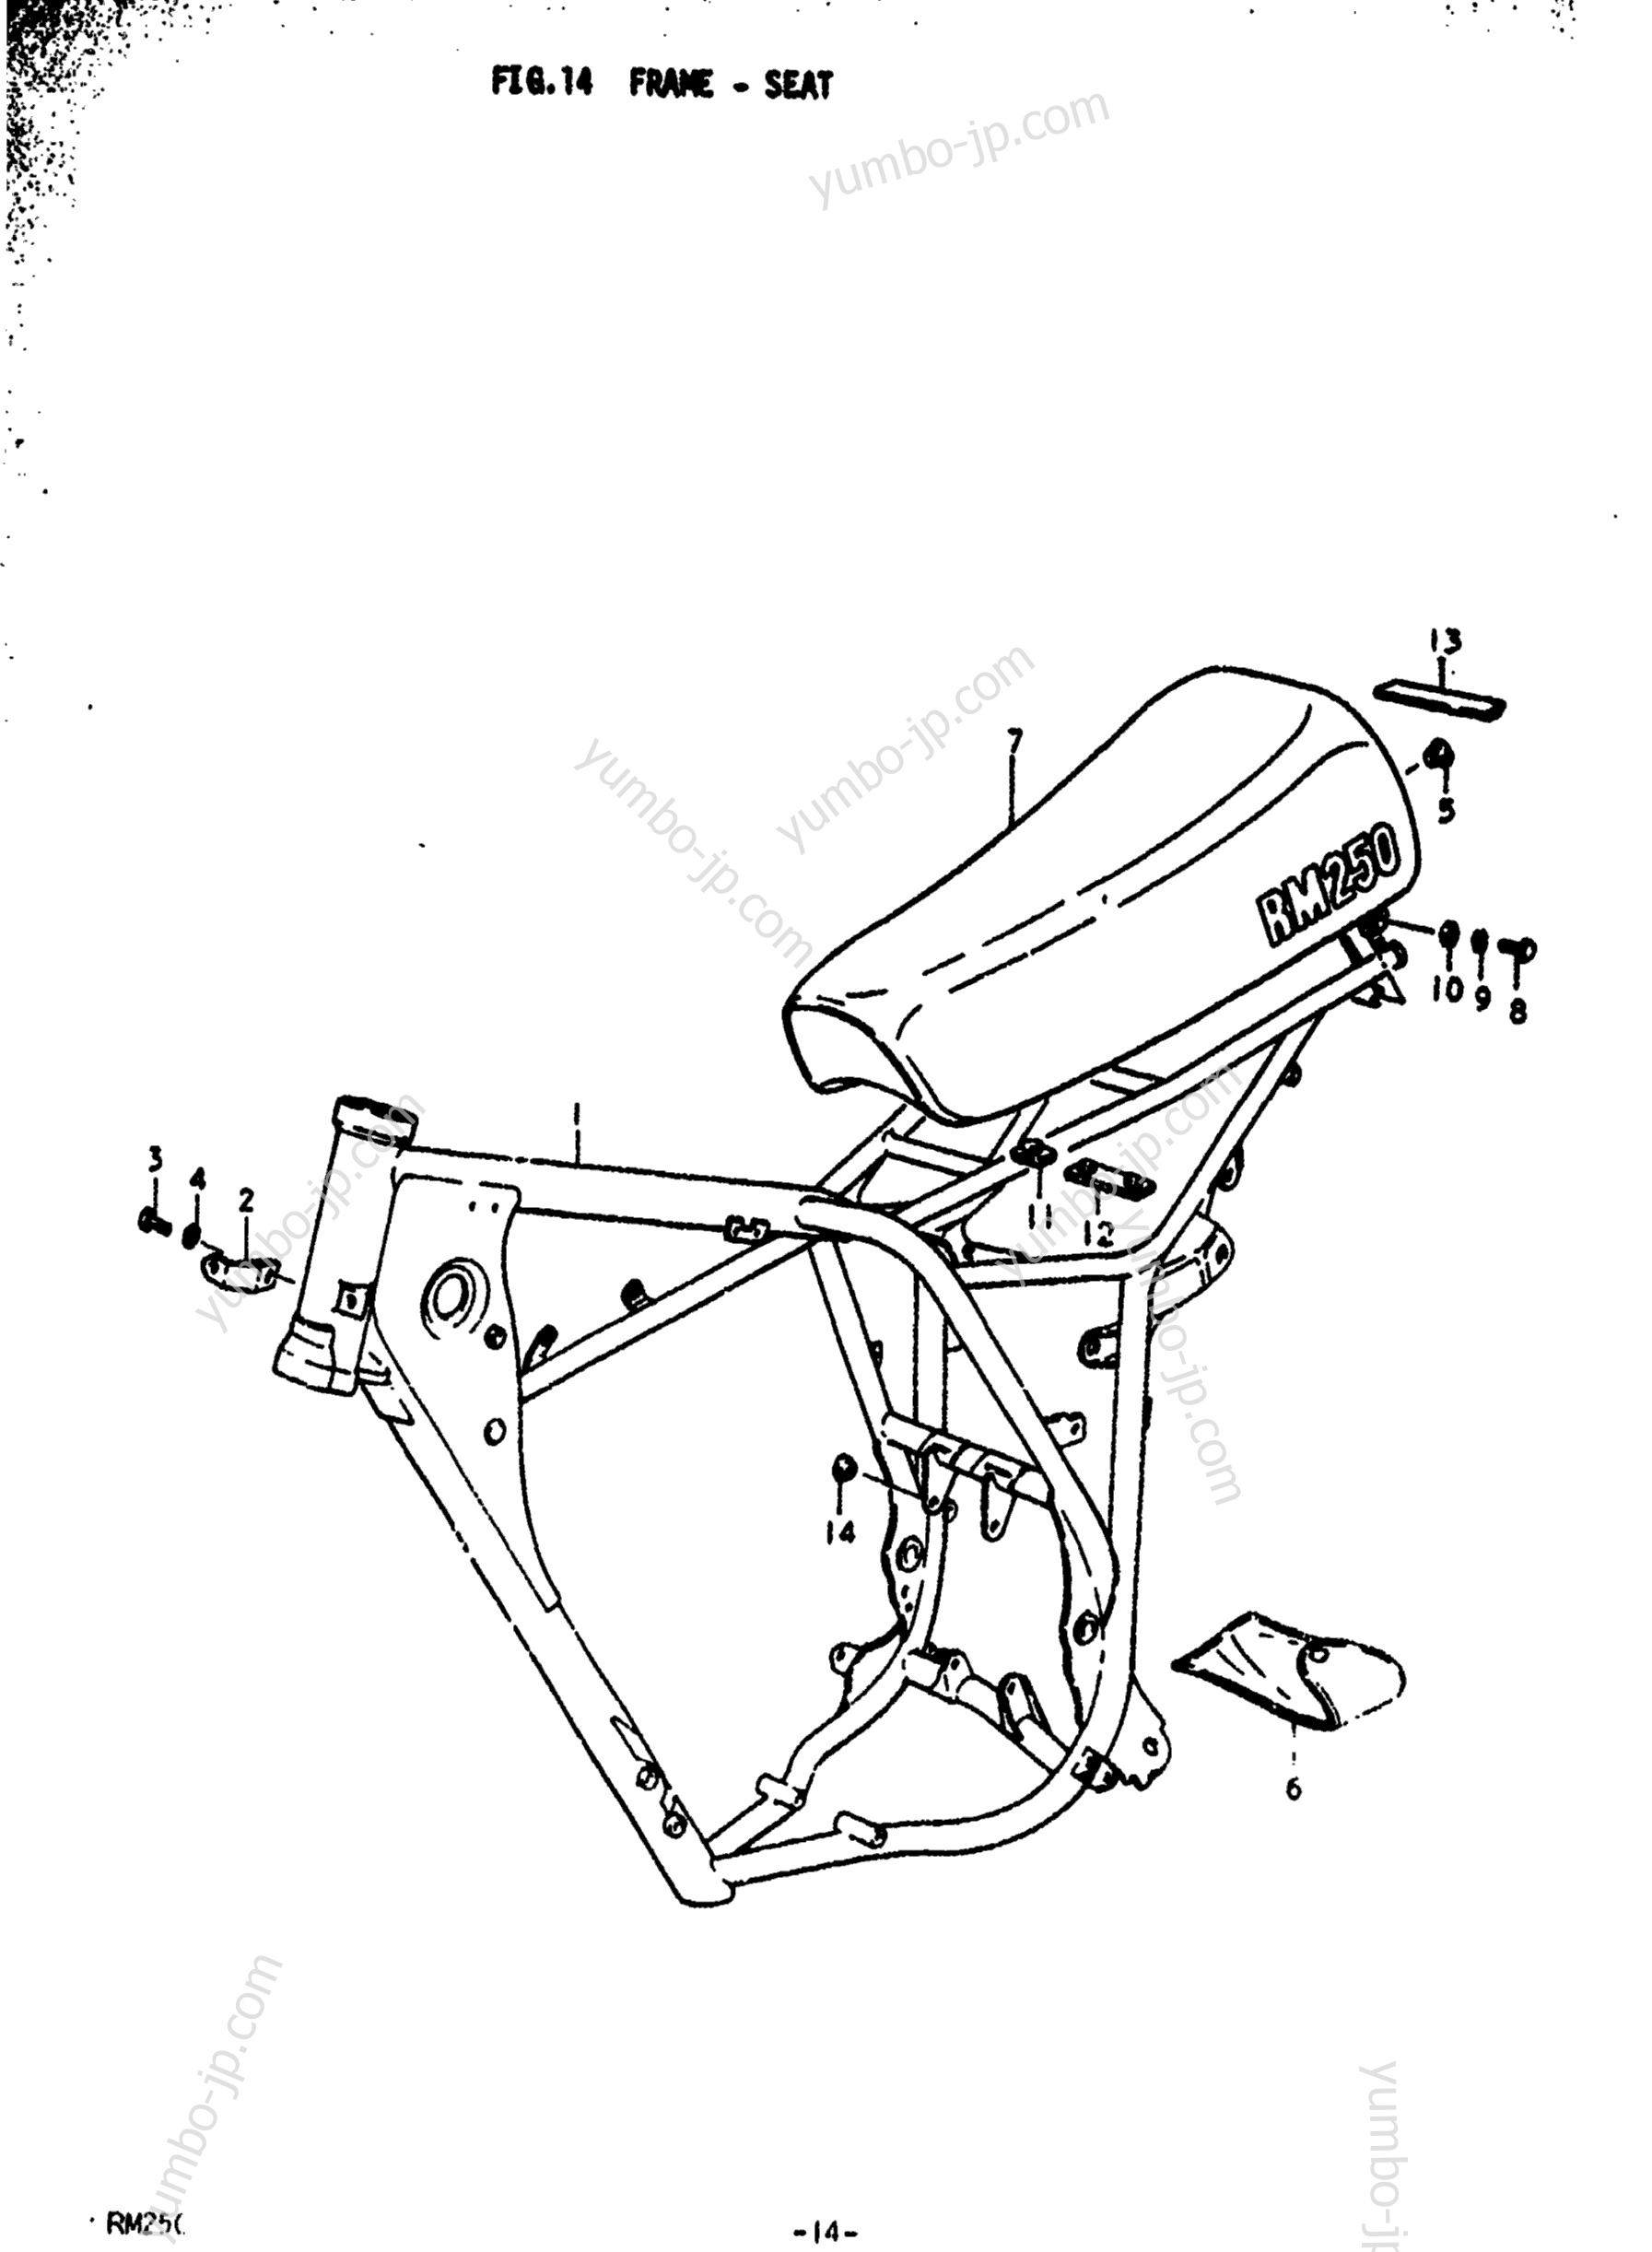 FRAME - SEAT for motorcycles SUZUKI RM250 1977 year